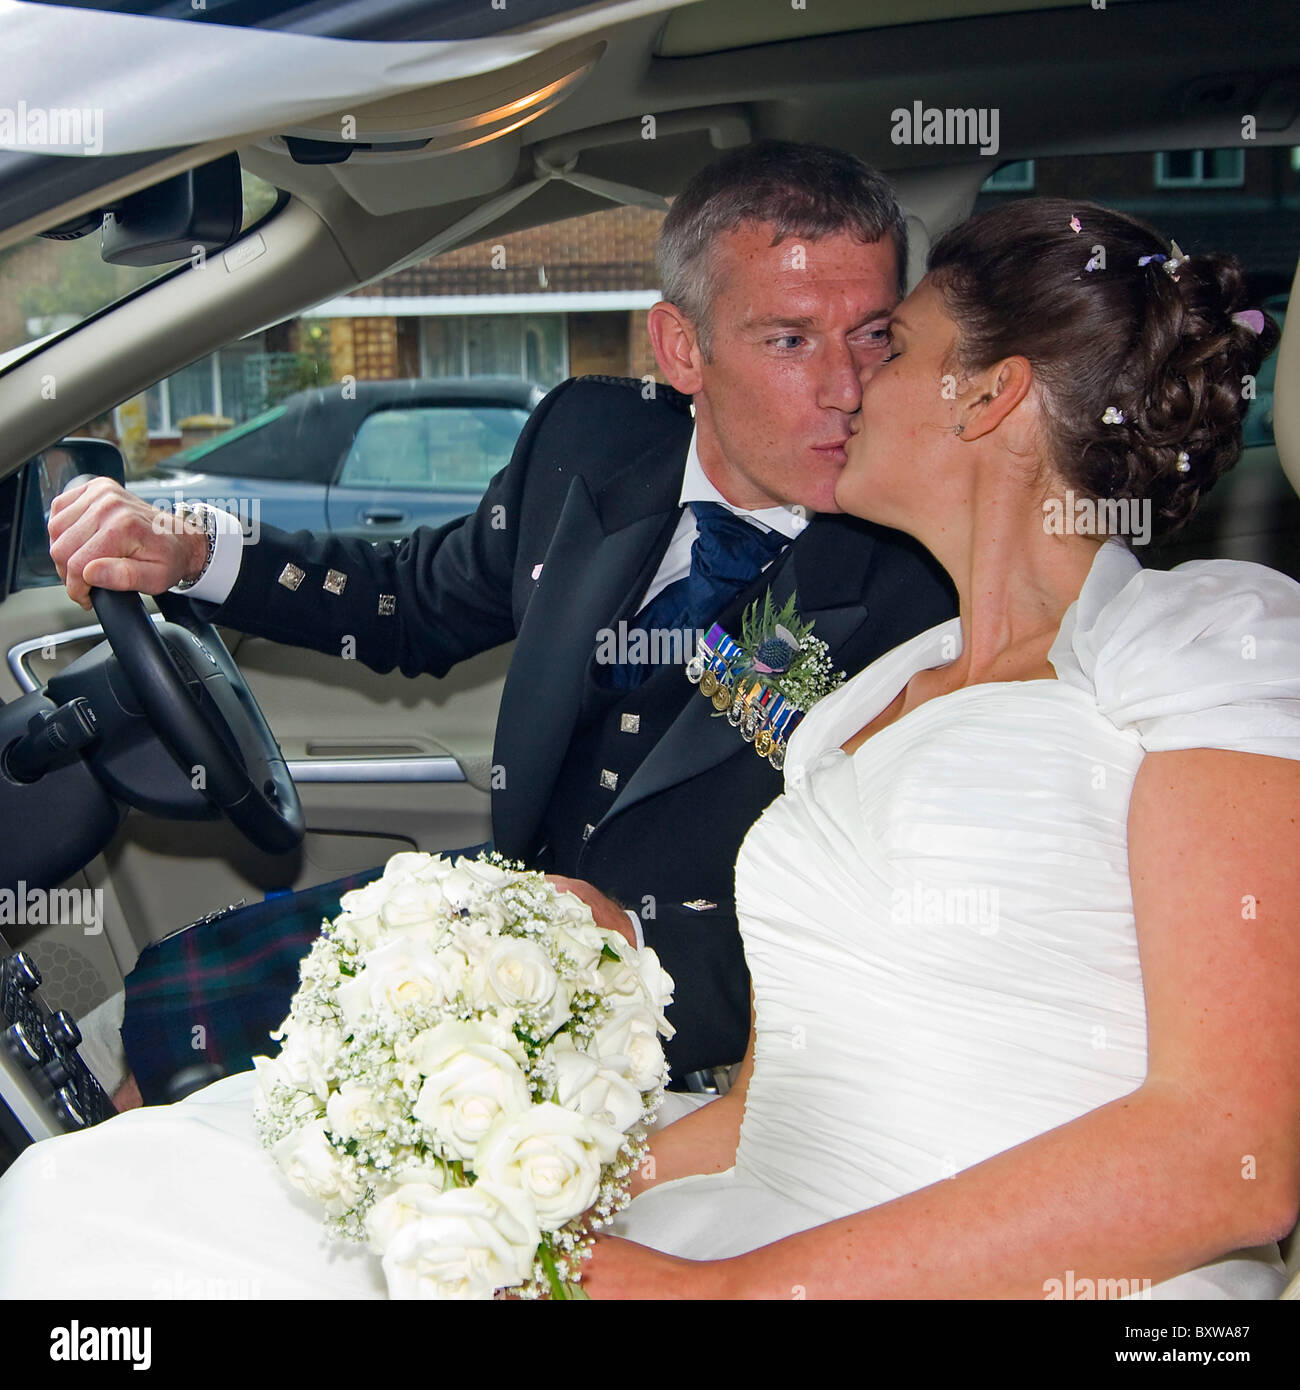 Square close up portrait of a bride and groom kissing in a car. Stock Photo